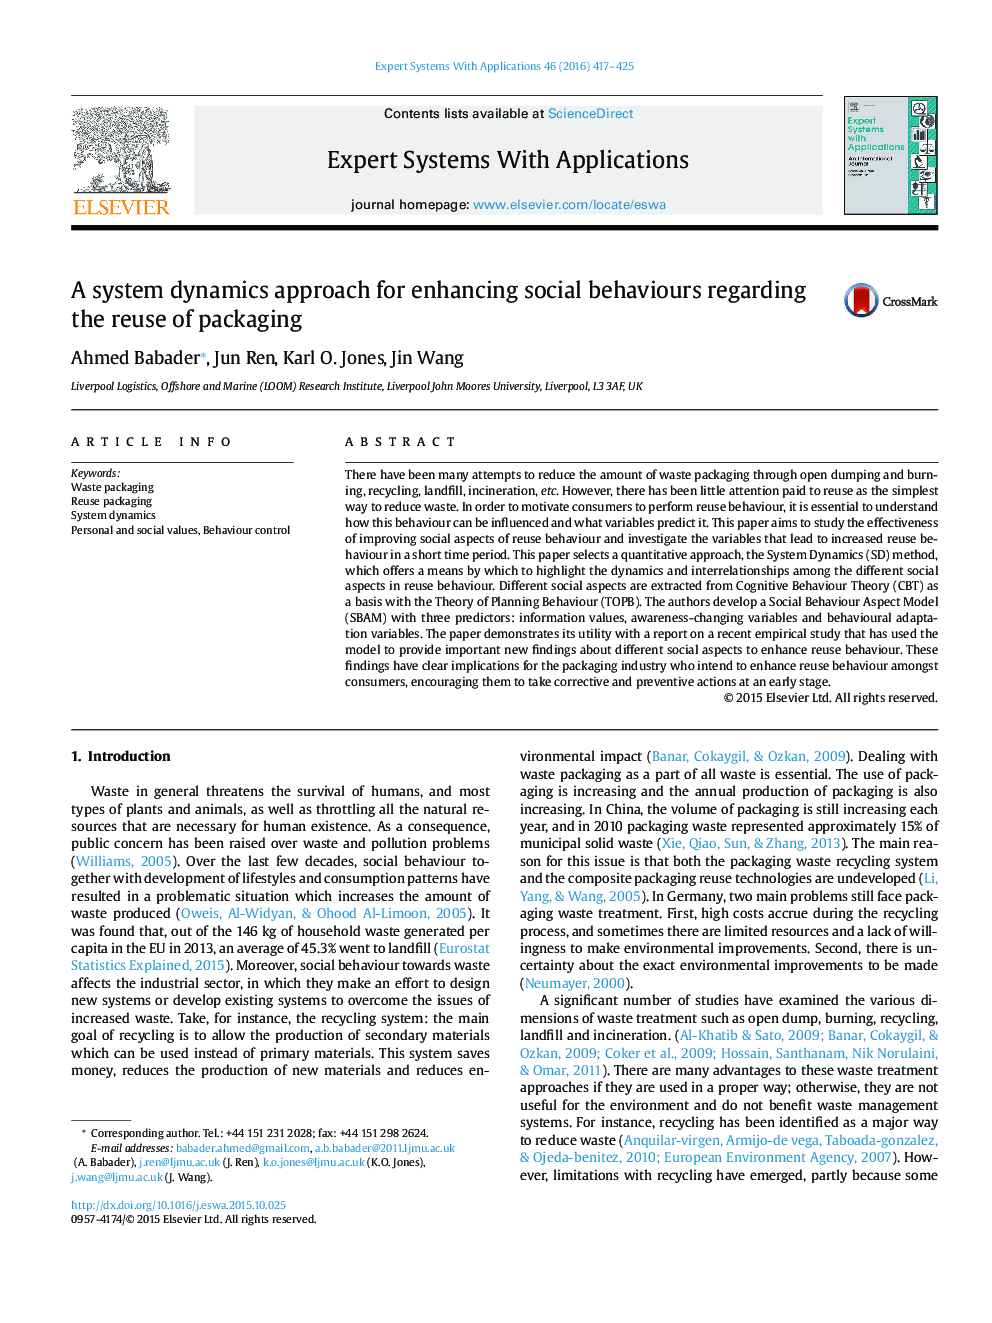 A system dynamics approach for enhancing social behaviours regarding the reuse of packaging
